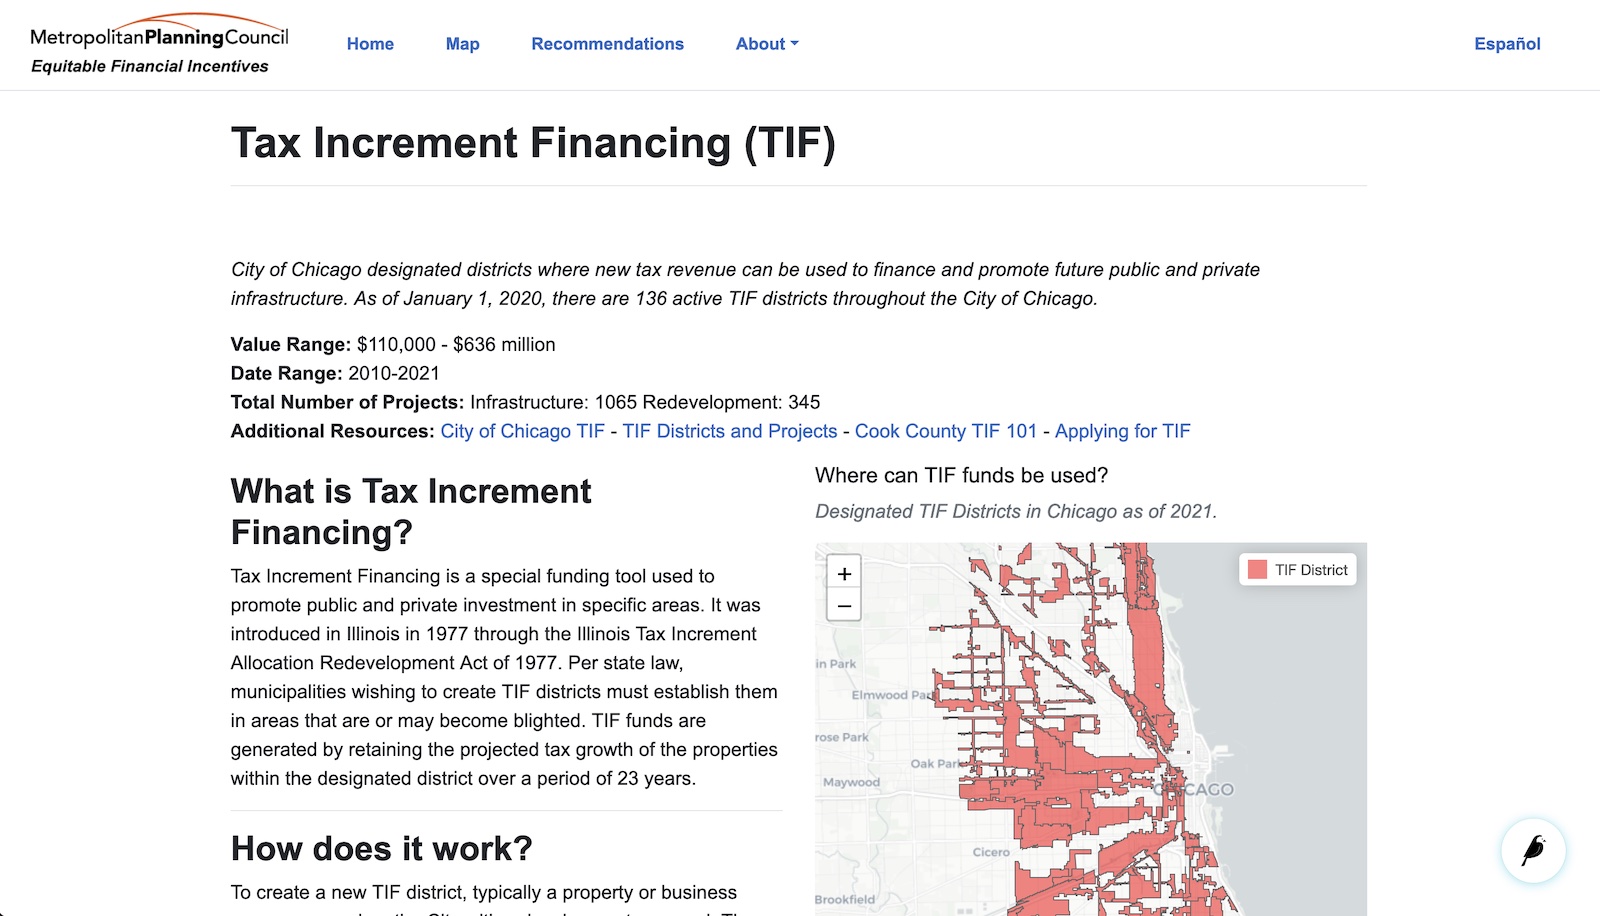 Each type of financial incentive has a detail page with the ability to embed maps in the content